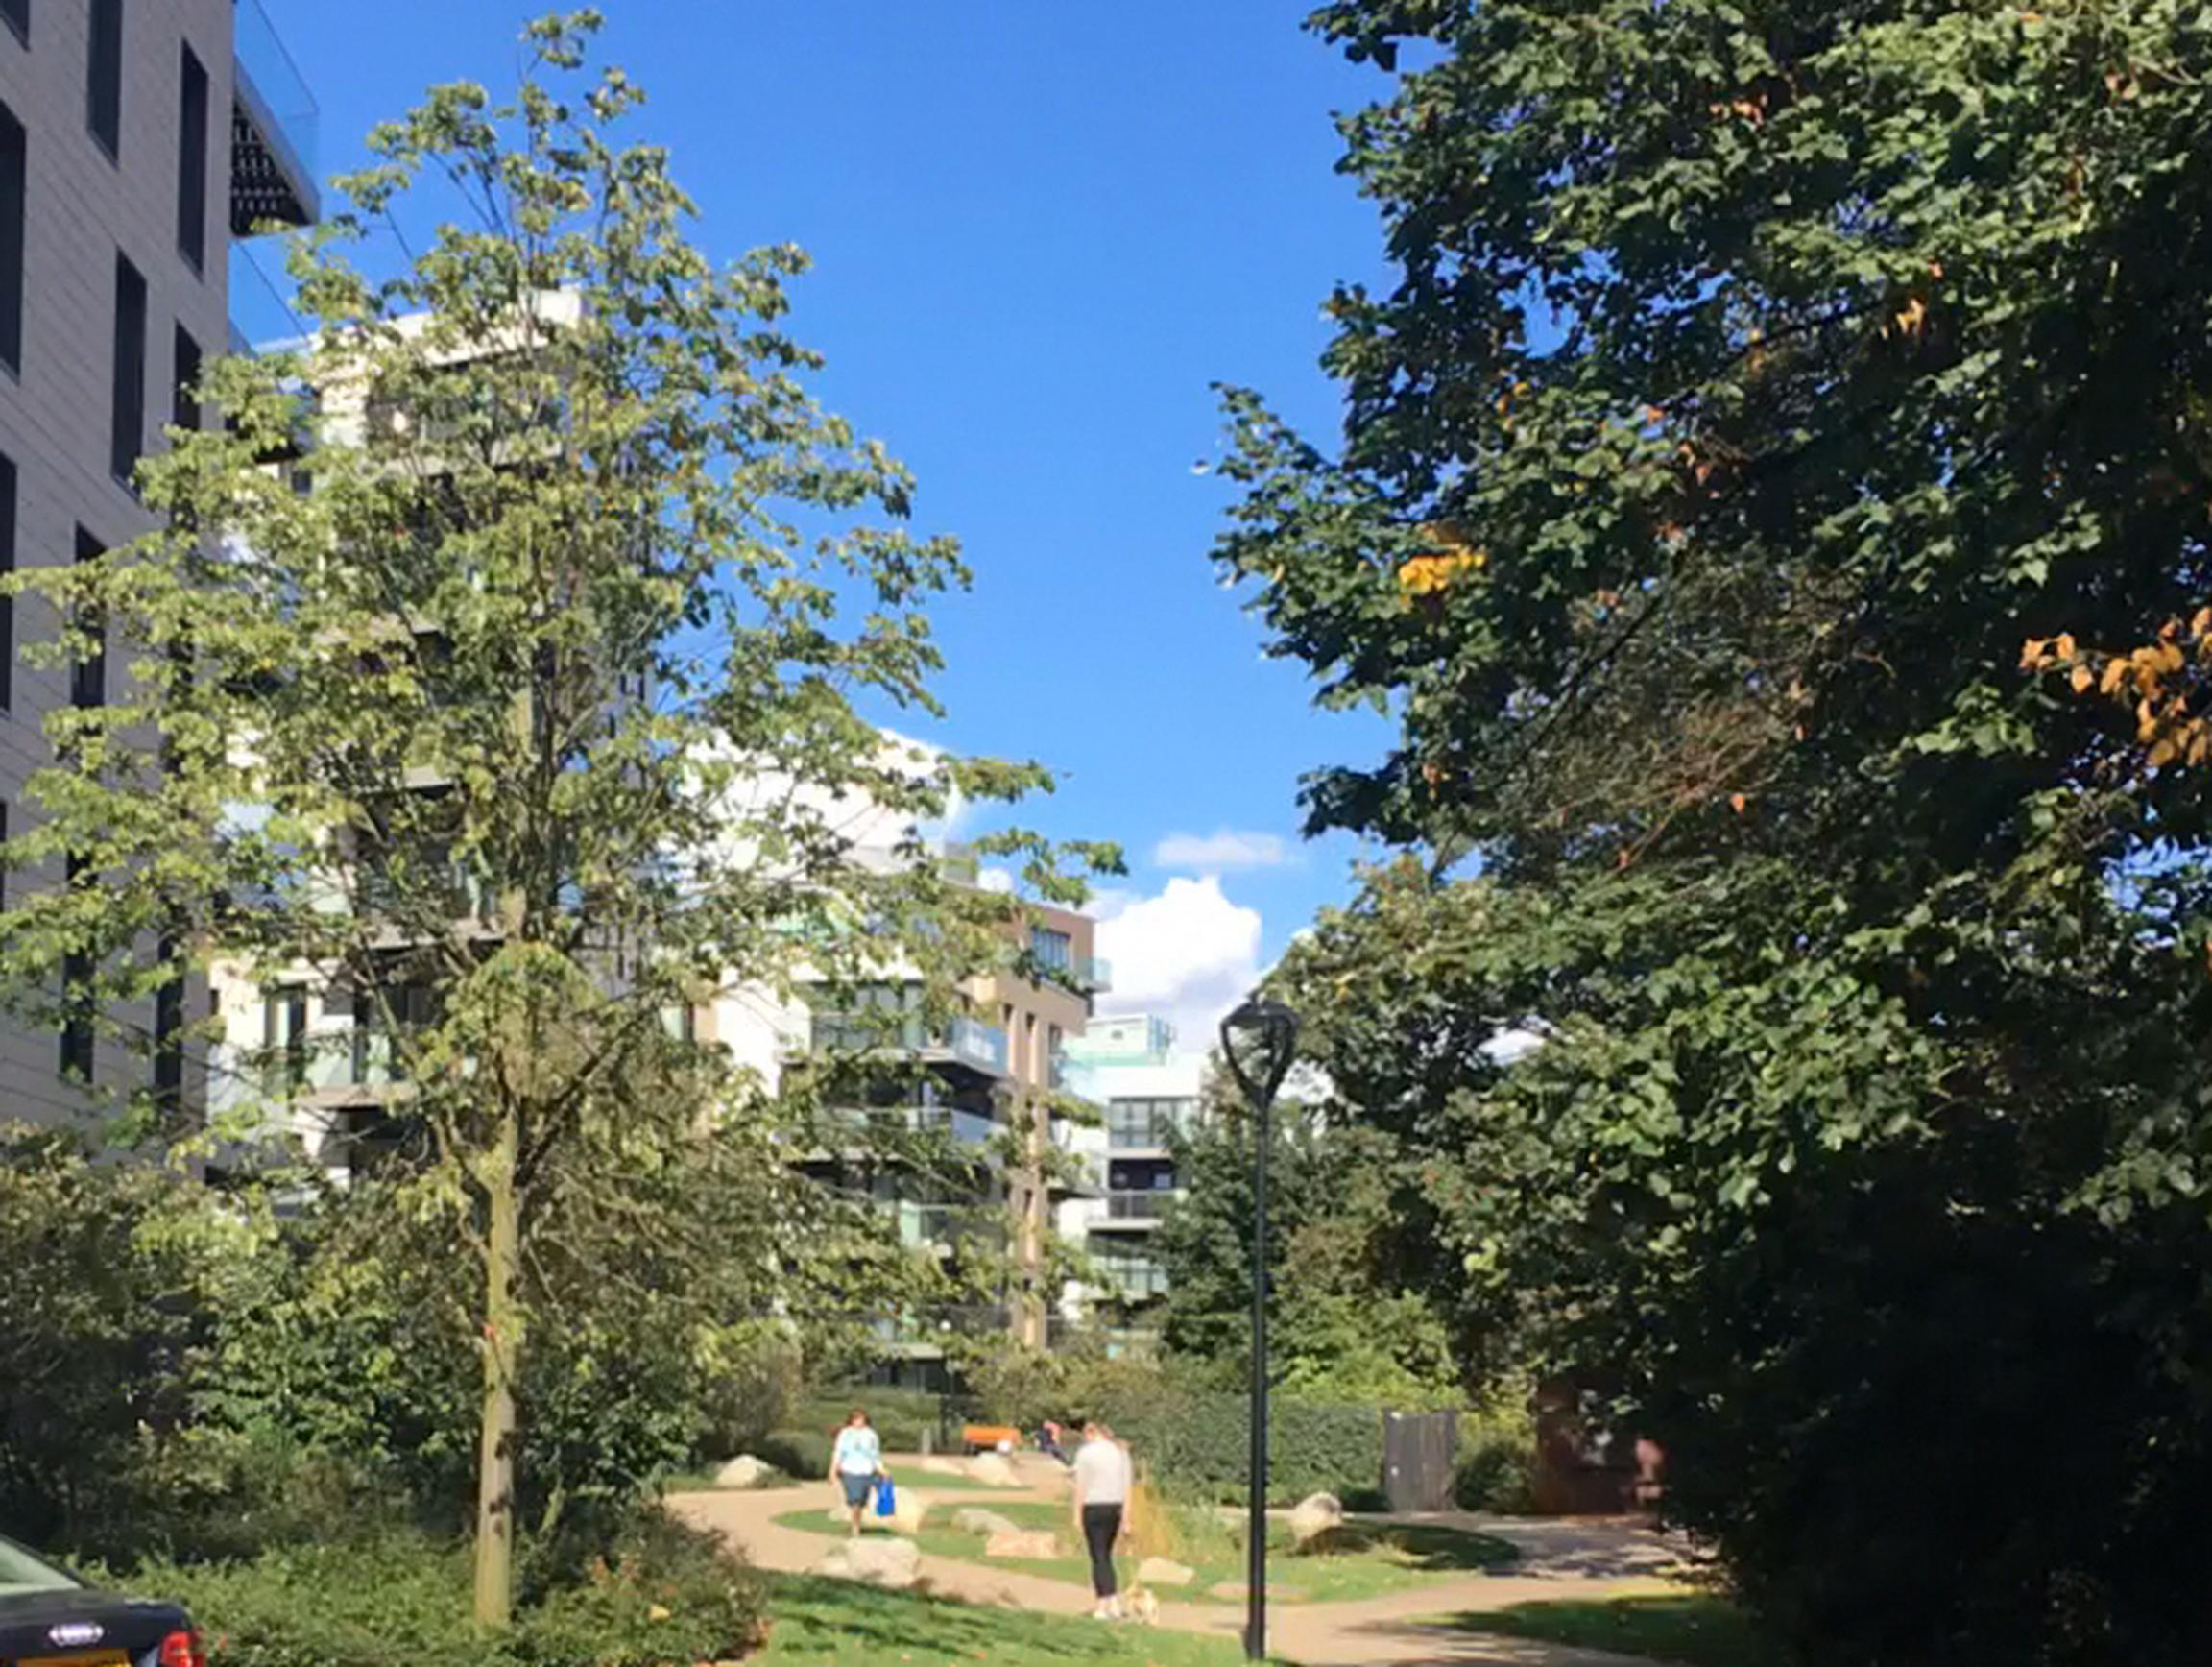 New development at Woodberry Down in London`s Zone 2 is car-lite and encourages walking and public transport use. However, local authorities find that prioritising walking and active transport in less well-connected places is not a priority for developers